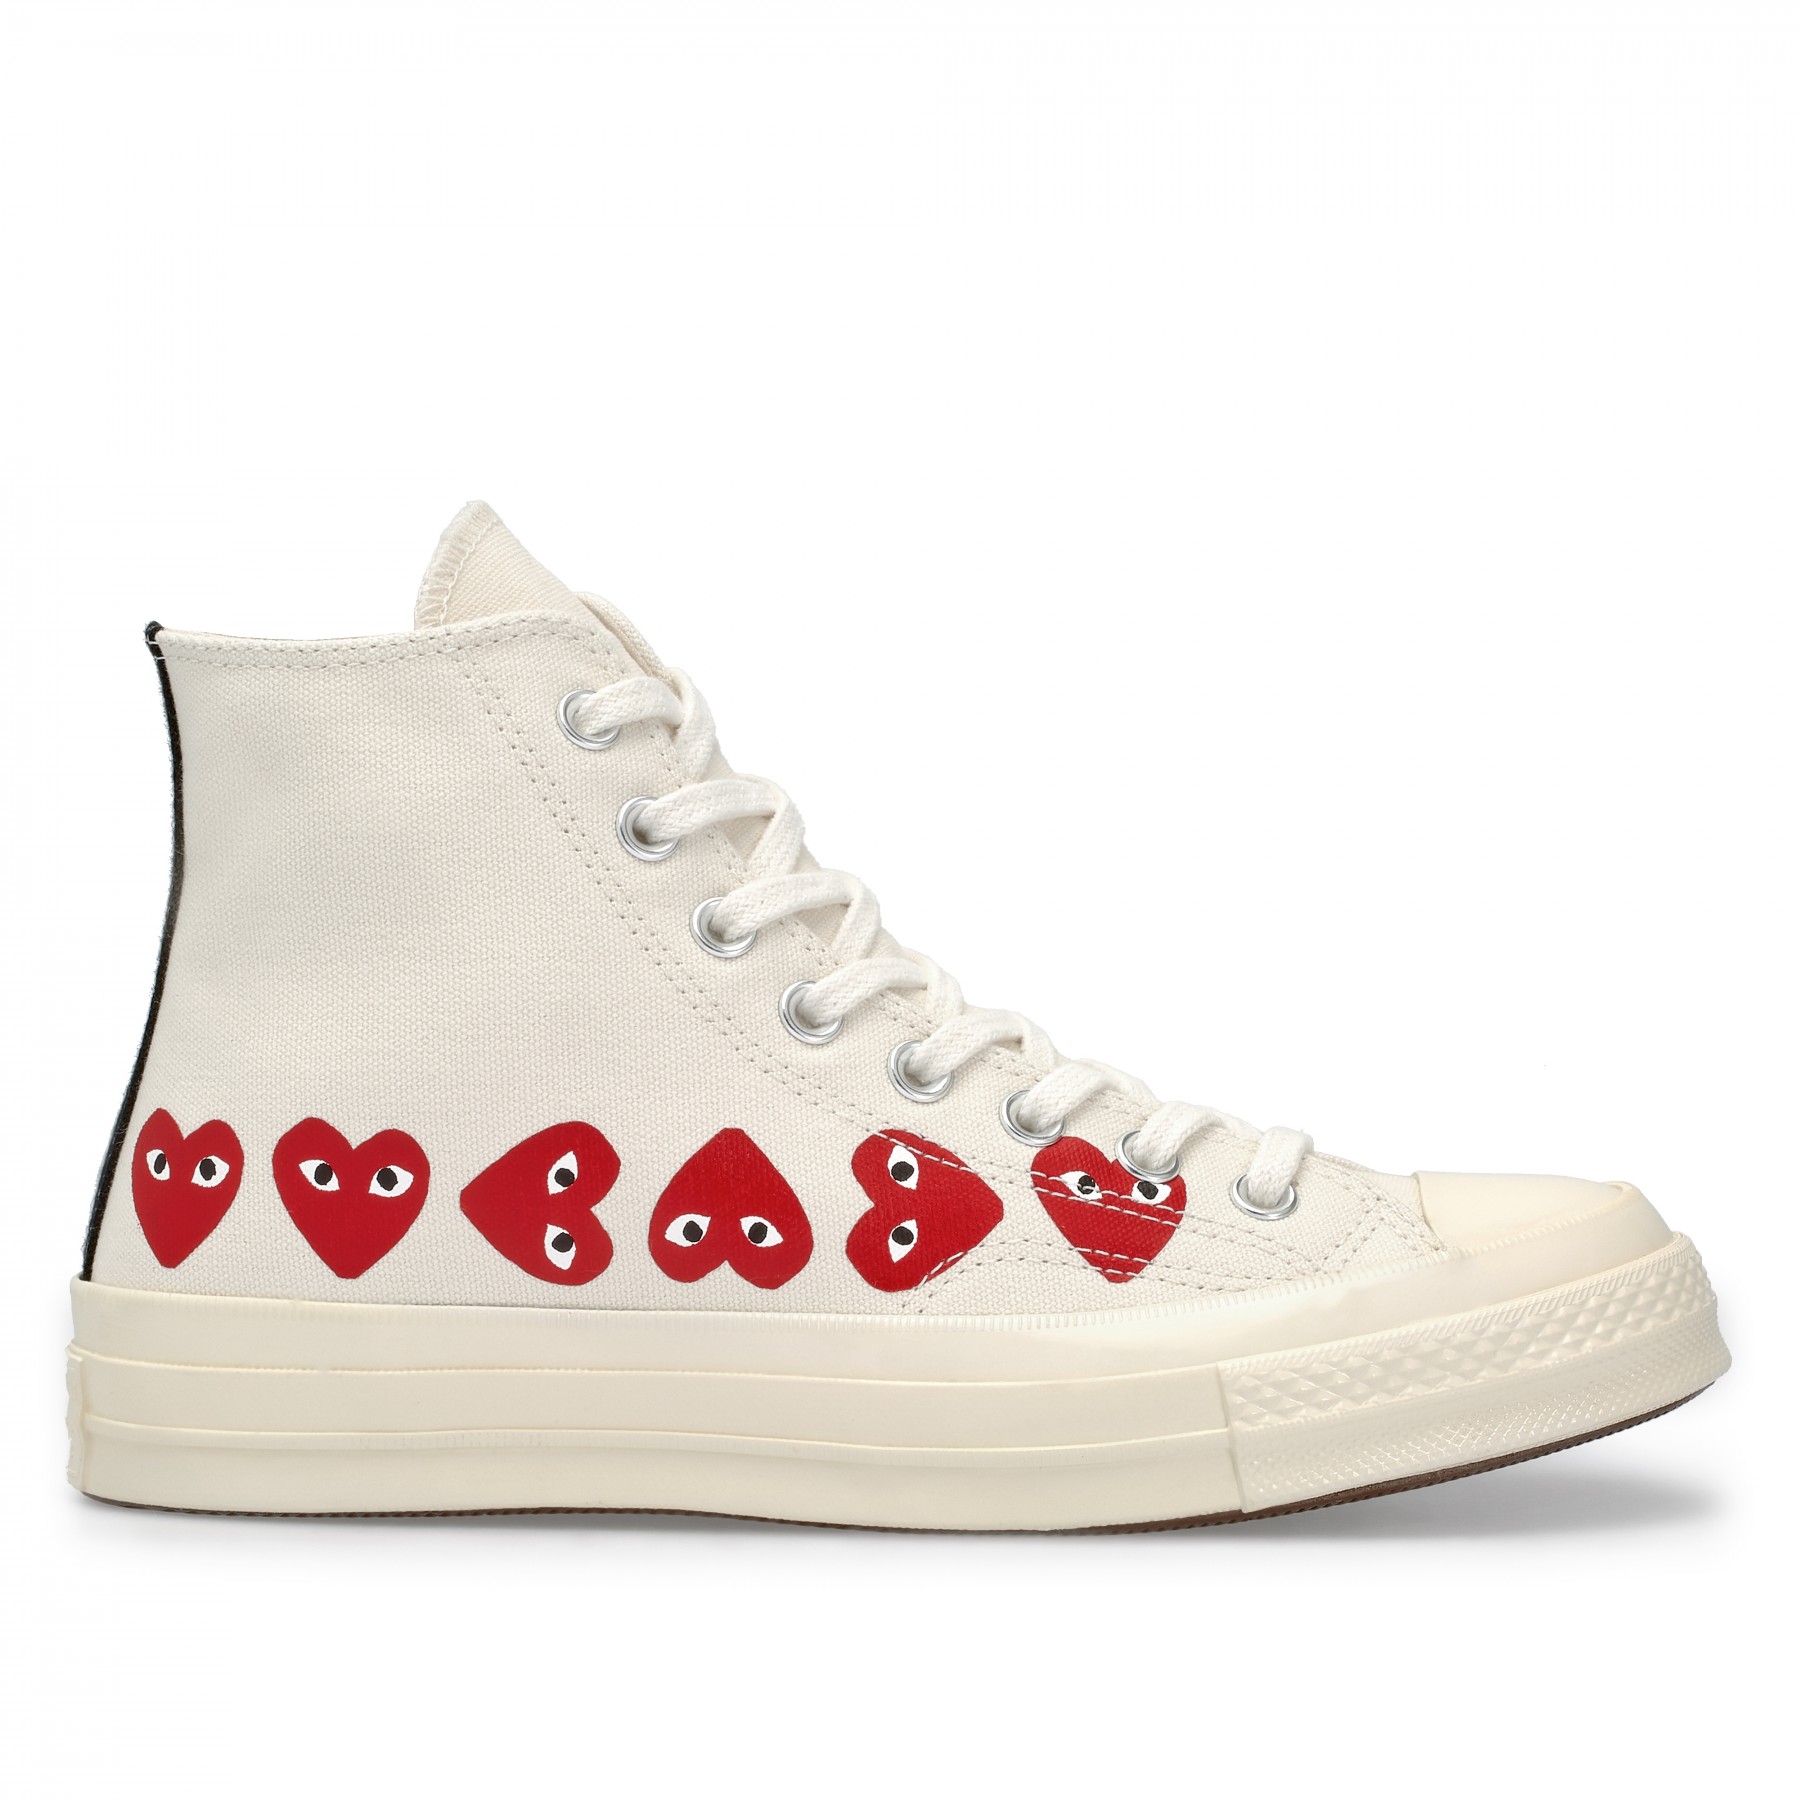 converse with a red heart